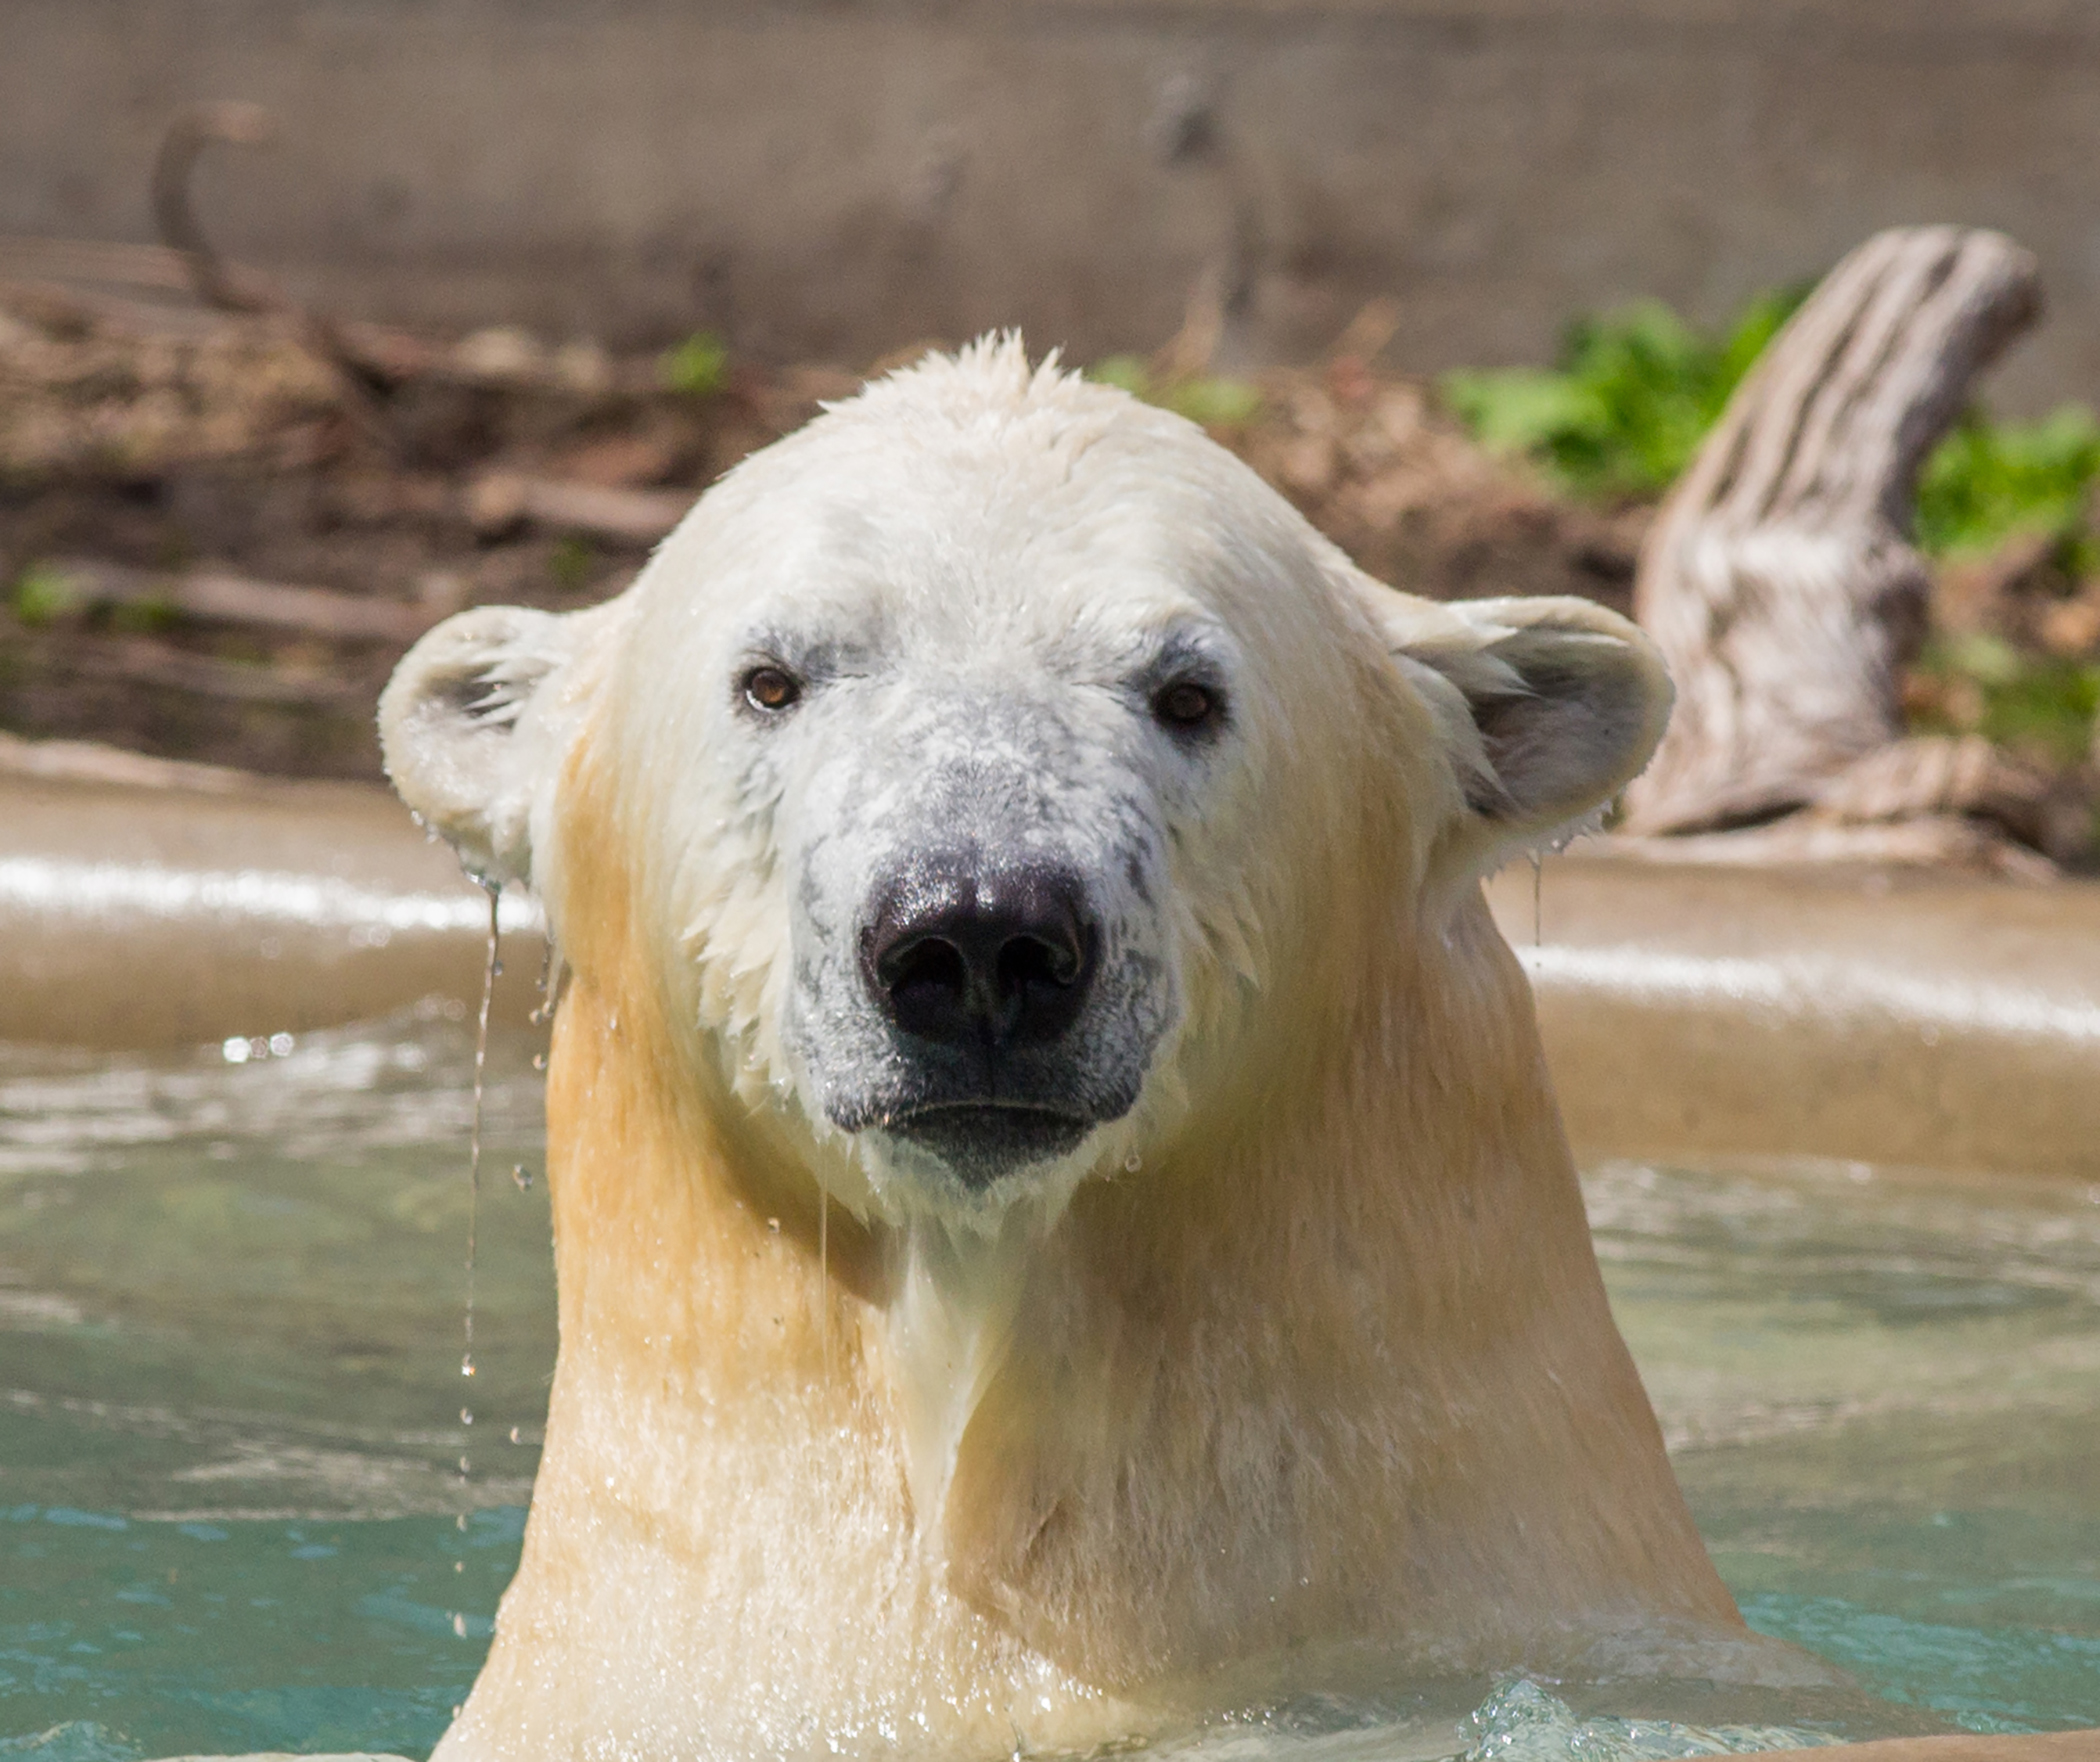 The 850-Pound Polar Bear  Kali” was transported from Rochester, New York to the Saint Louis Zoo on May 5, as a donation by FedEx.